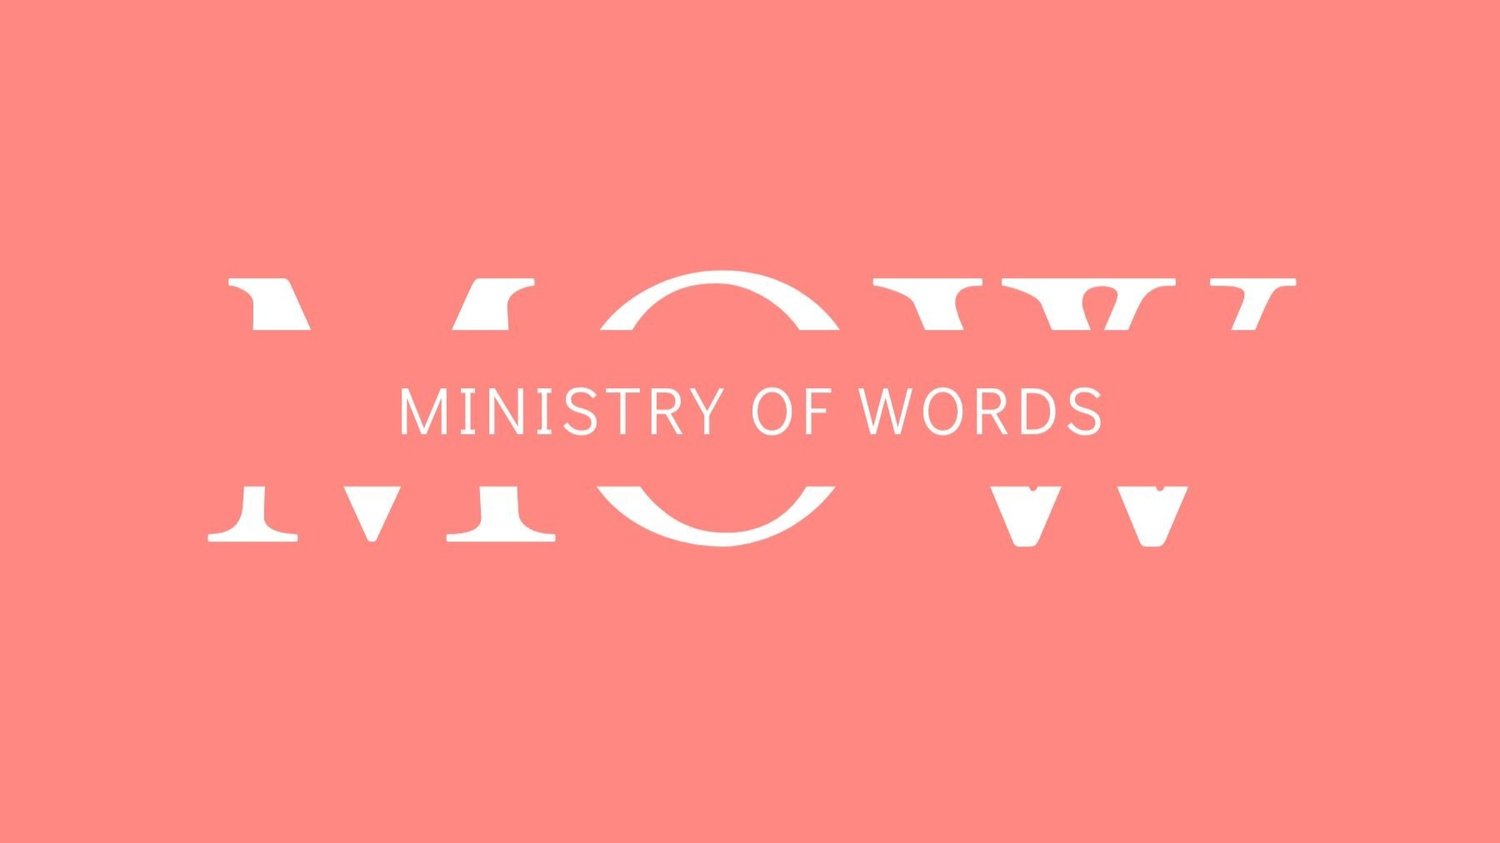 MINISTRY OF WORDS